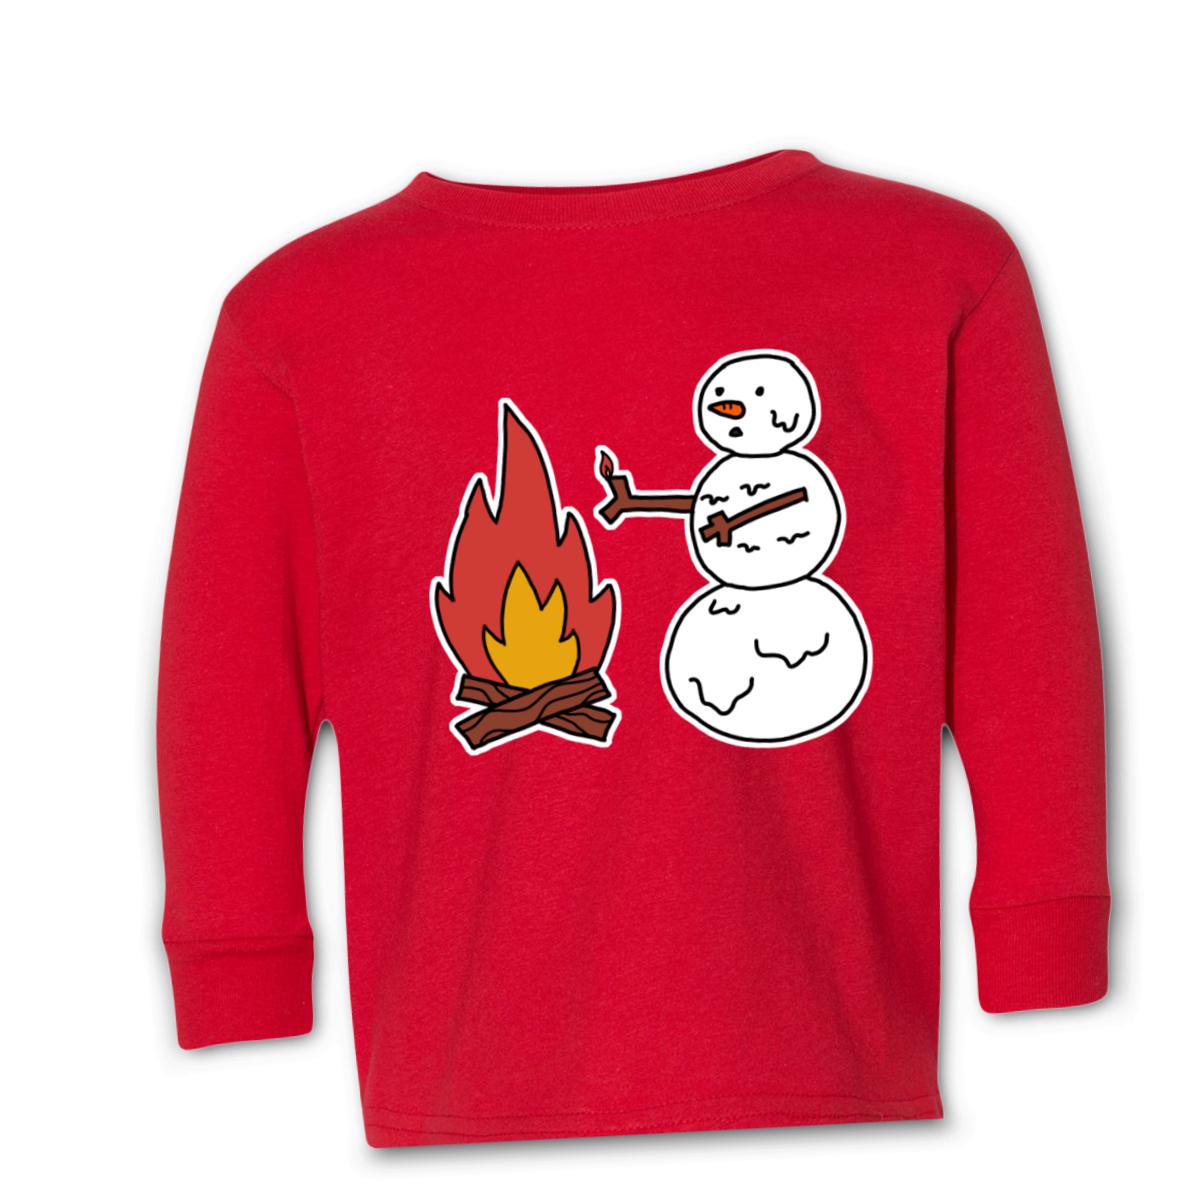 Snowman Keeping Warm Toddler Long Sleeve Tee 2T red